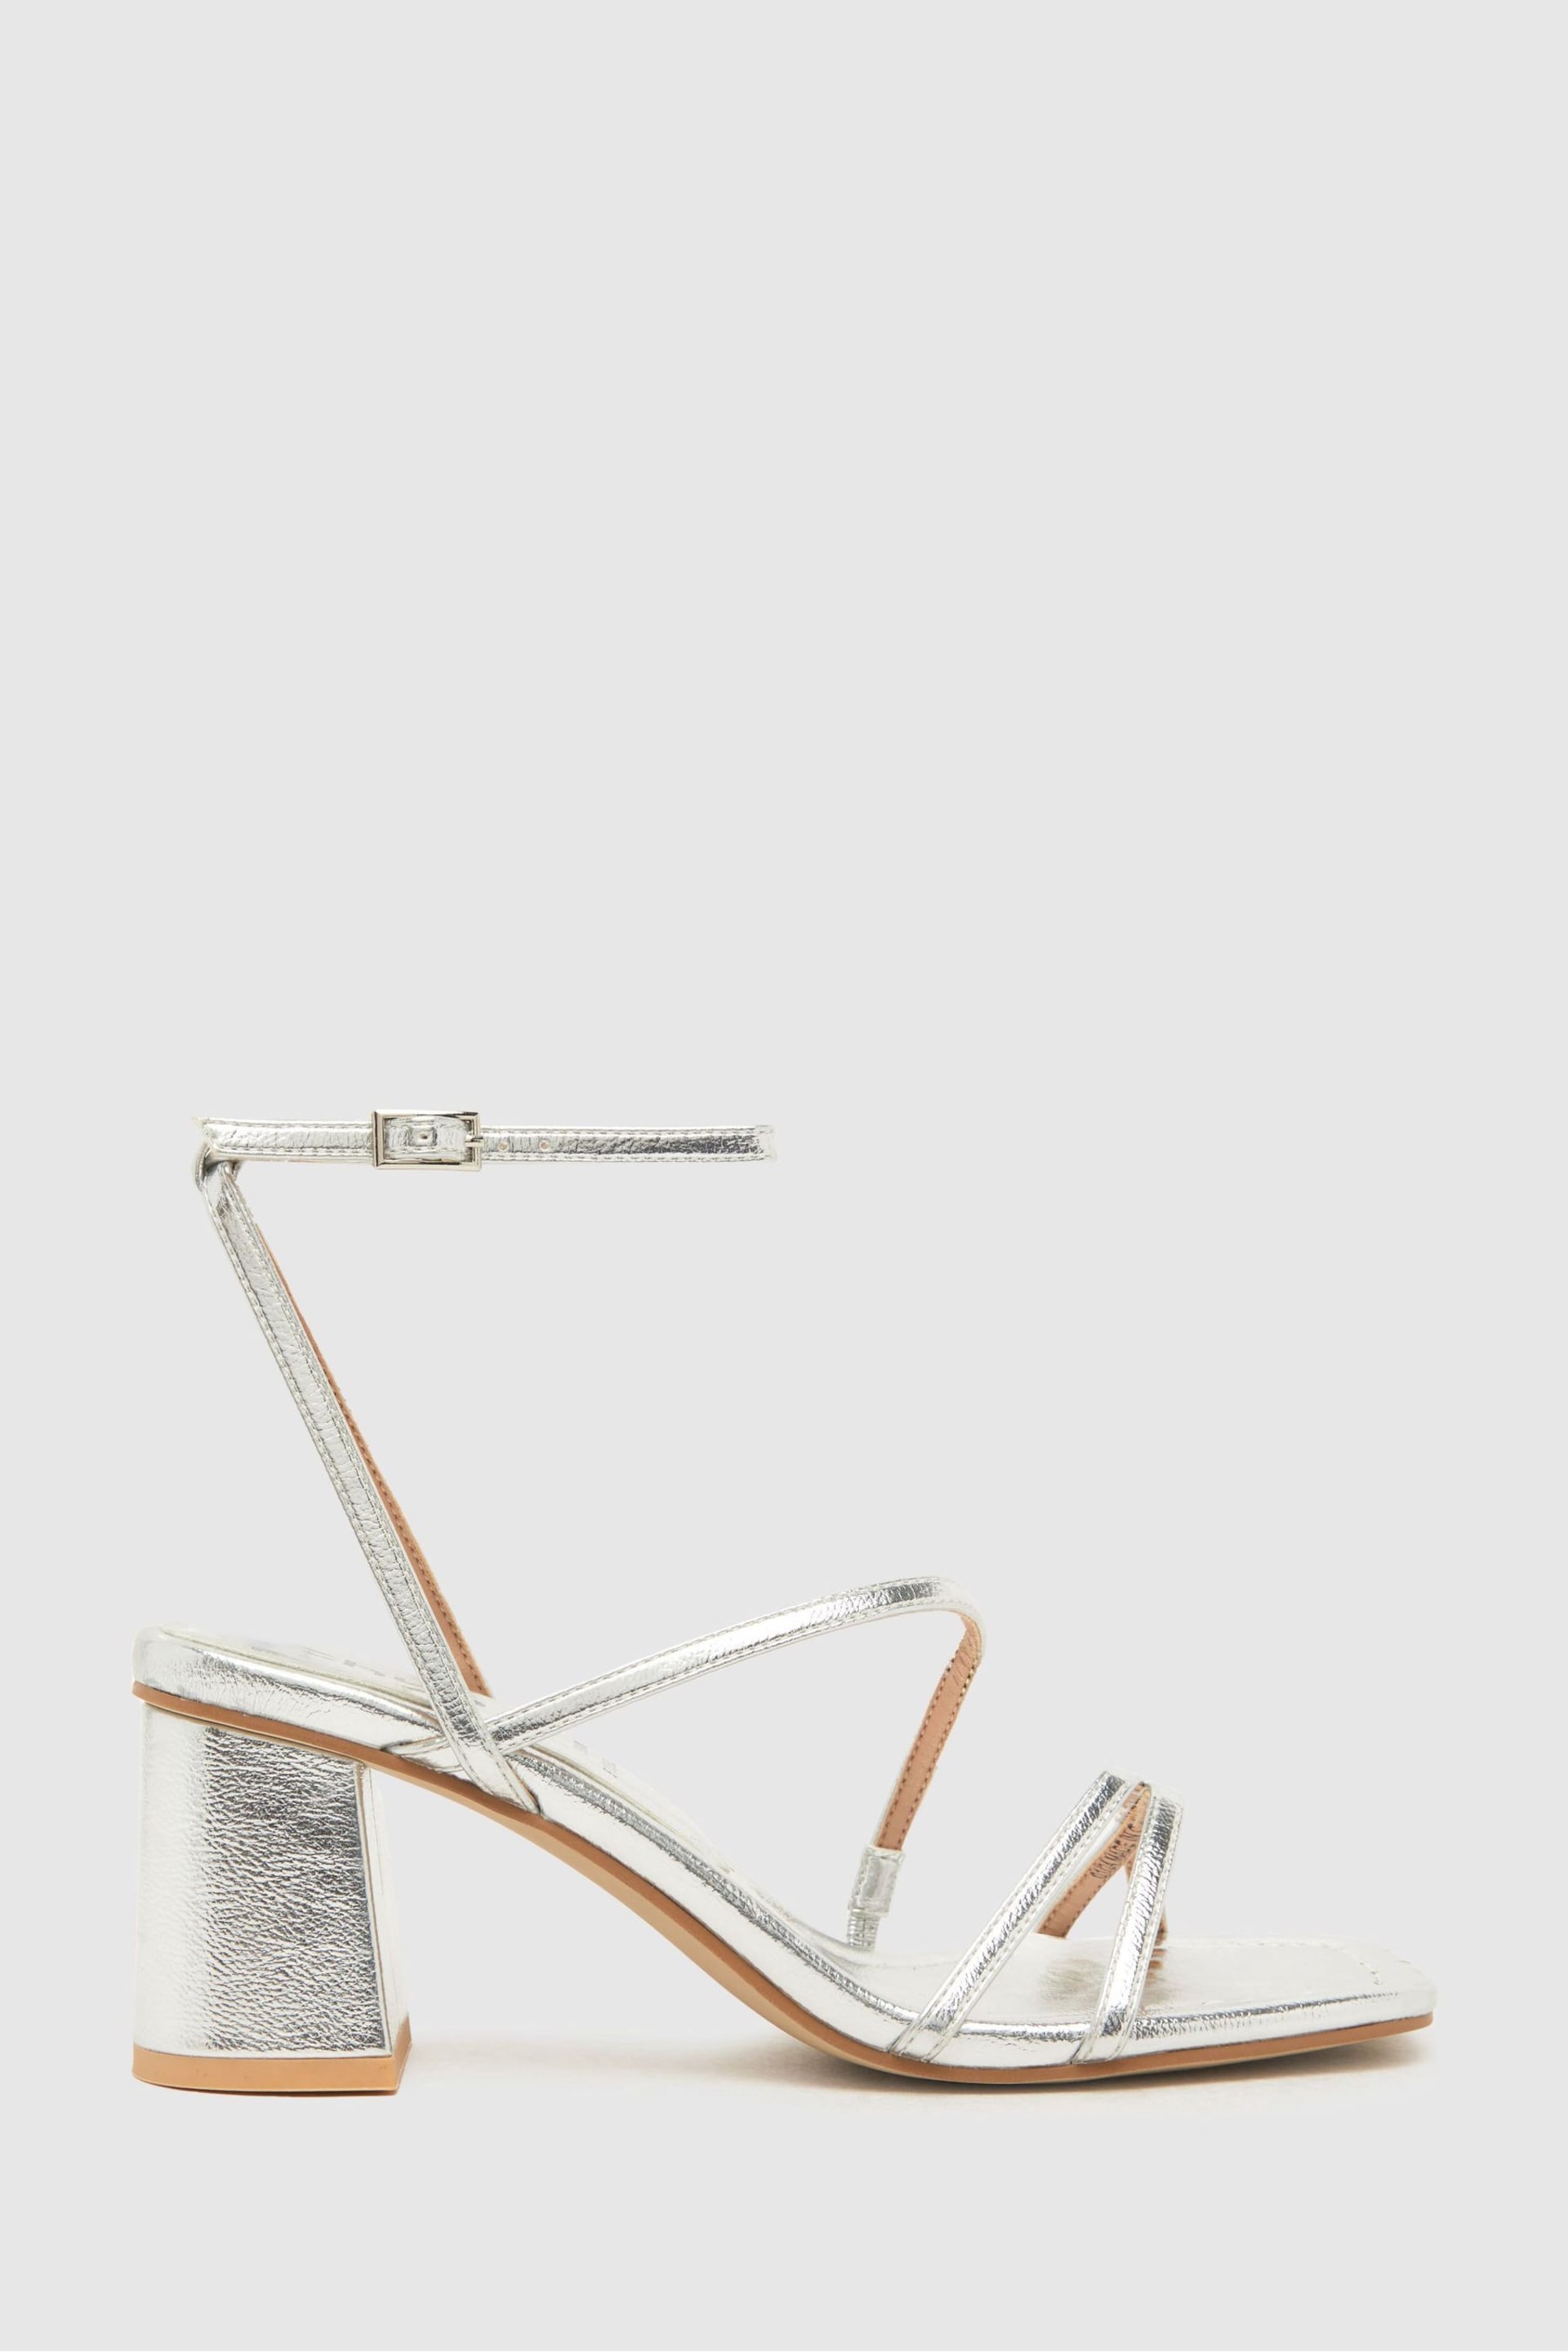 Schuh Sully Strappy Block Heels - Image 1 of 4